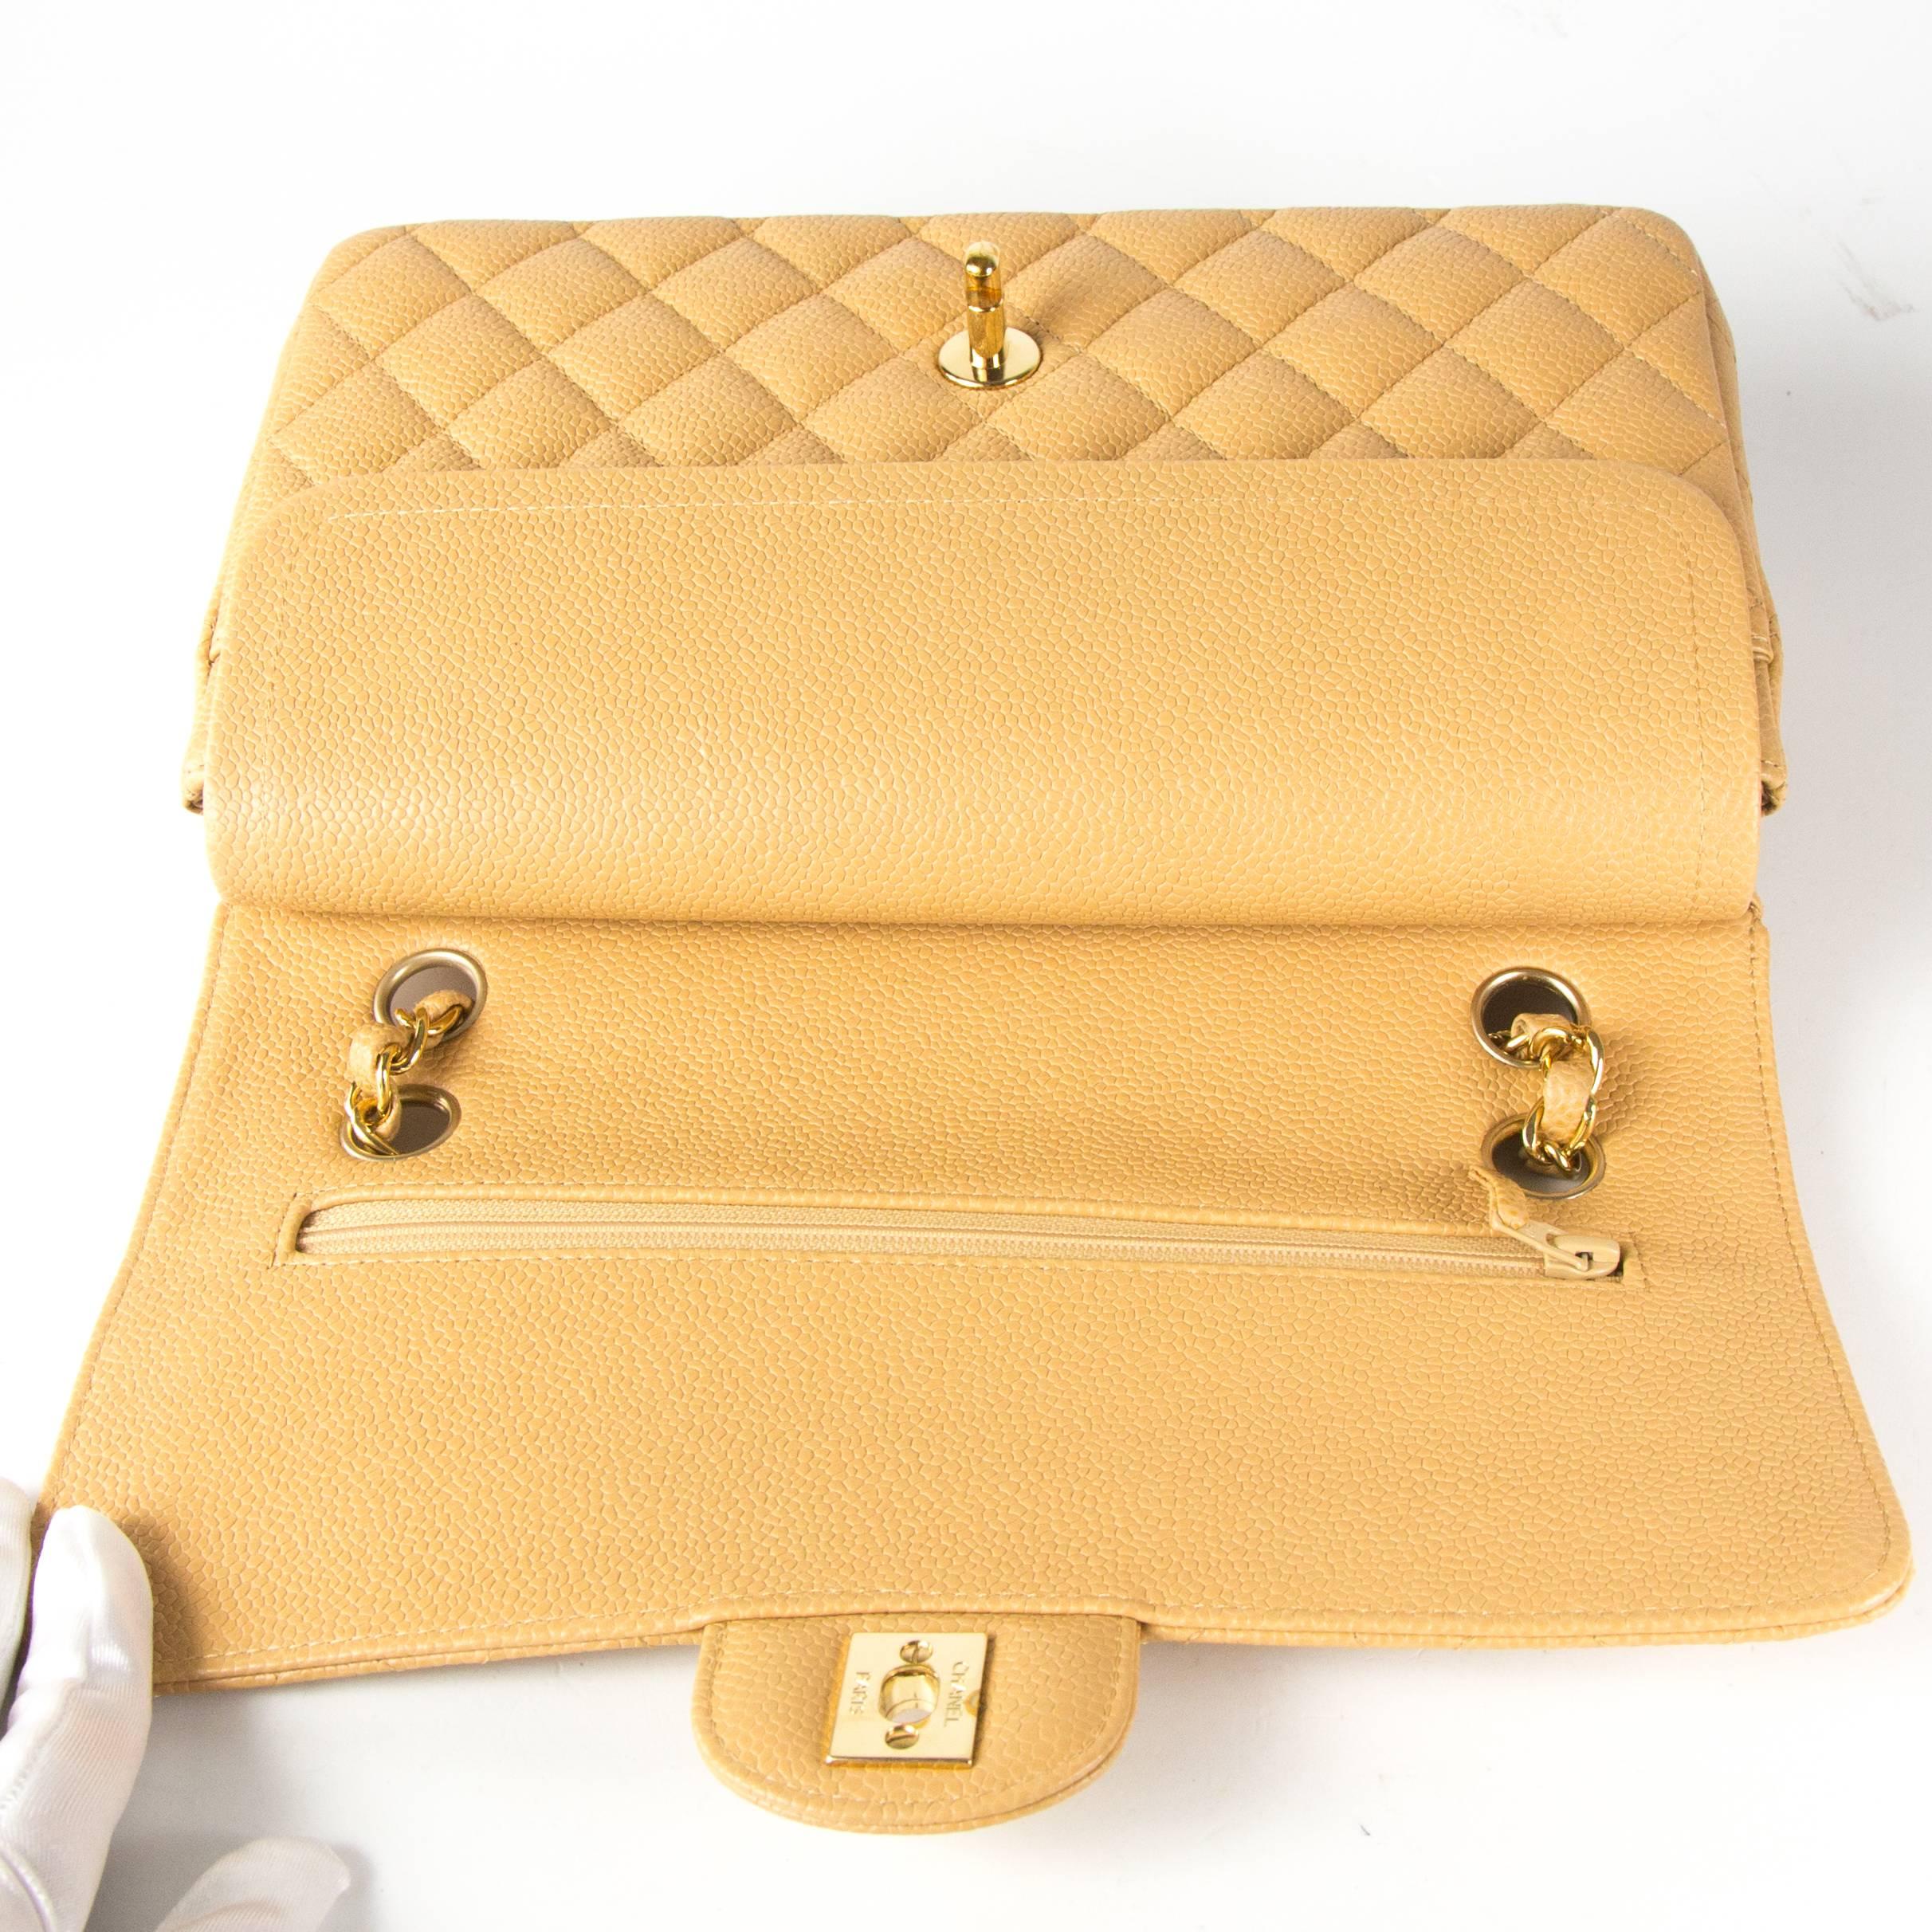 Chanel Caviar Double Flap Bag - Tan Beige Quilted Leather Medium CC Gold Handbag In Good Condition In Prahran, Victoria